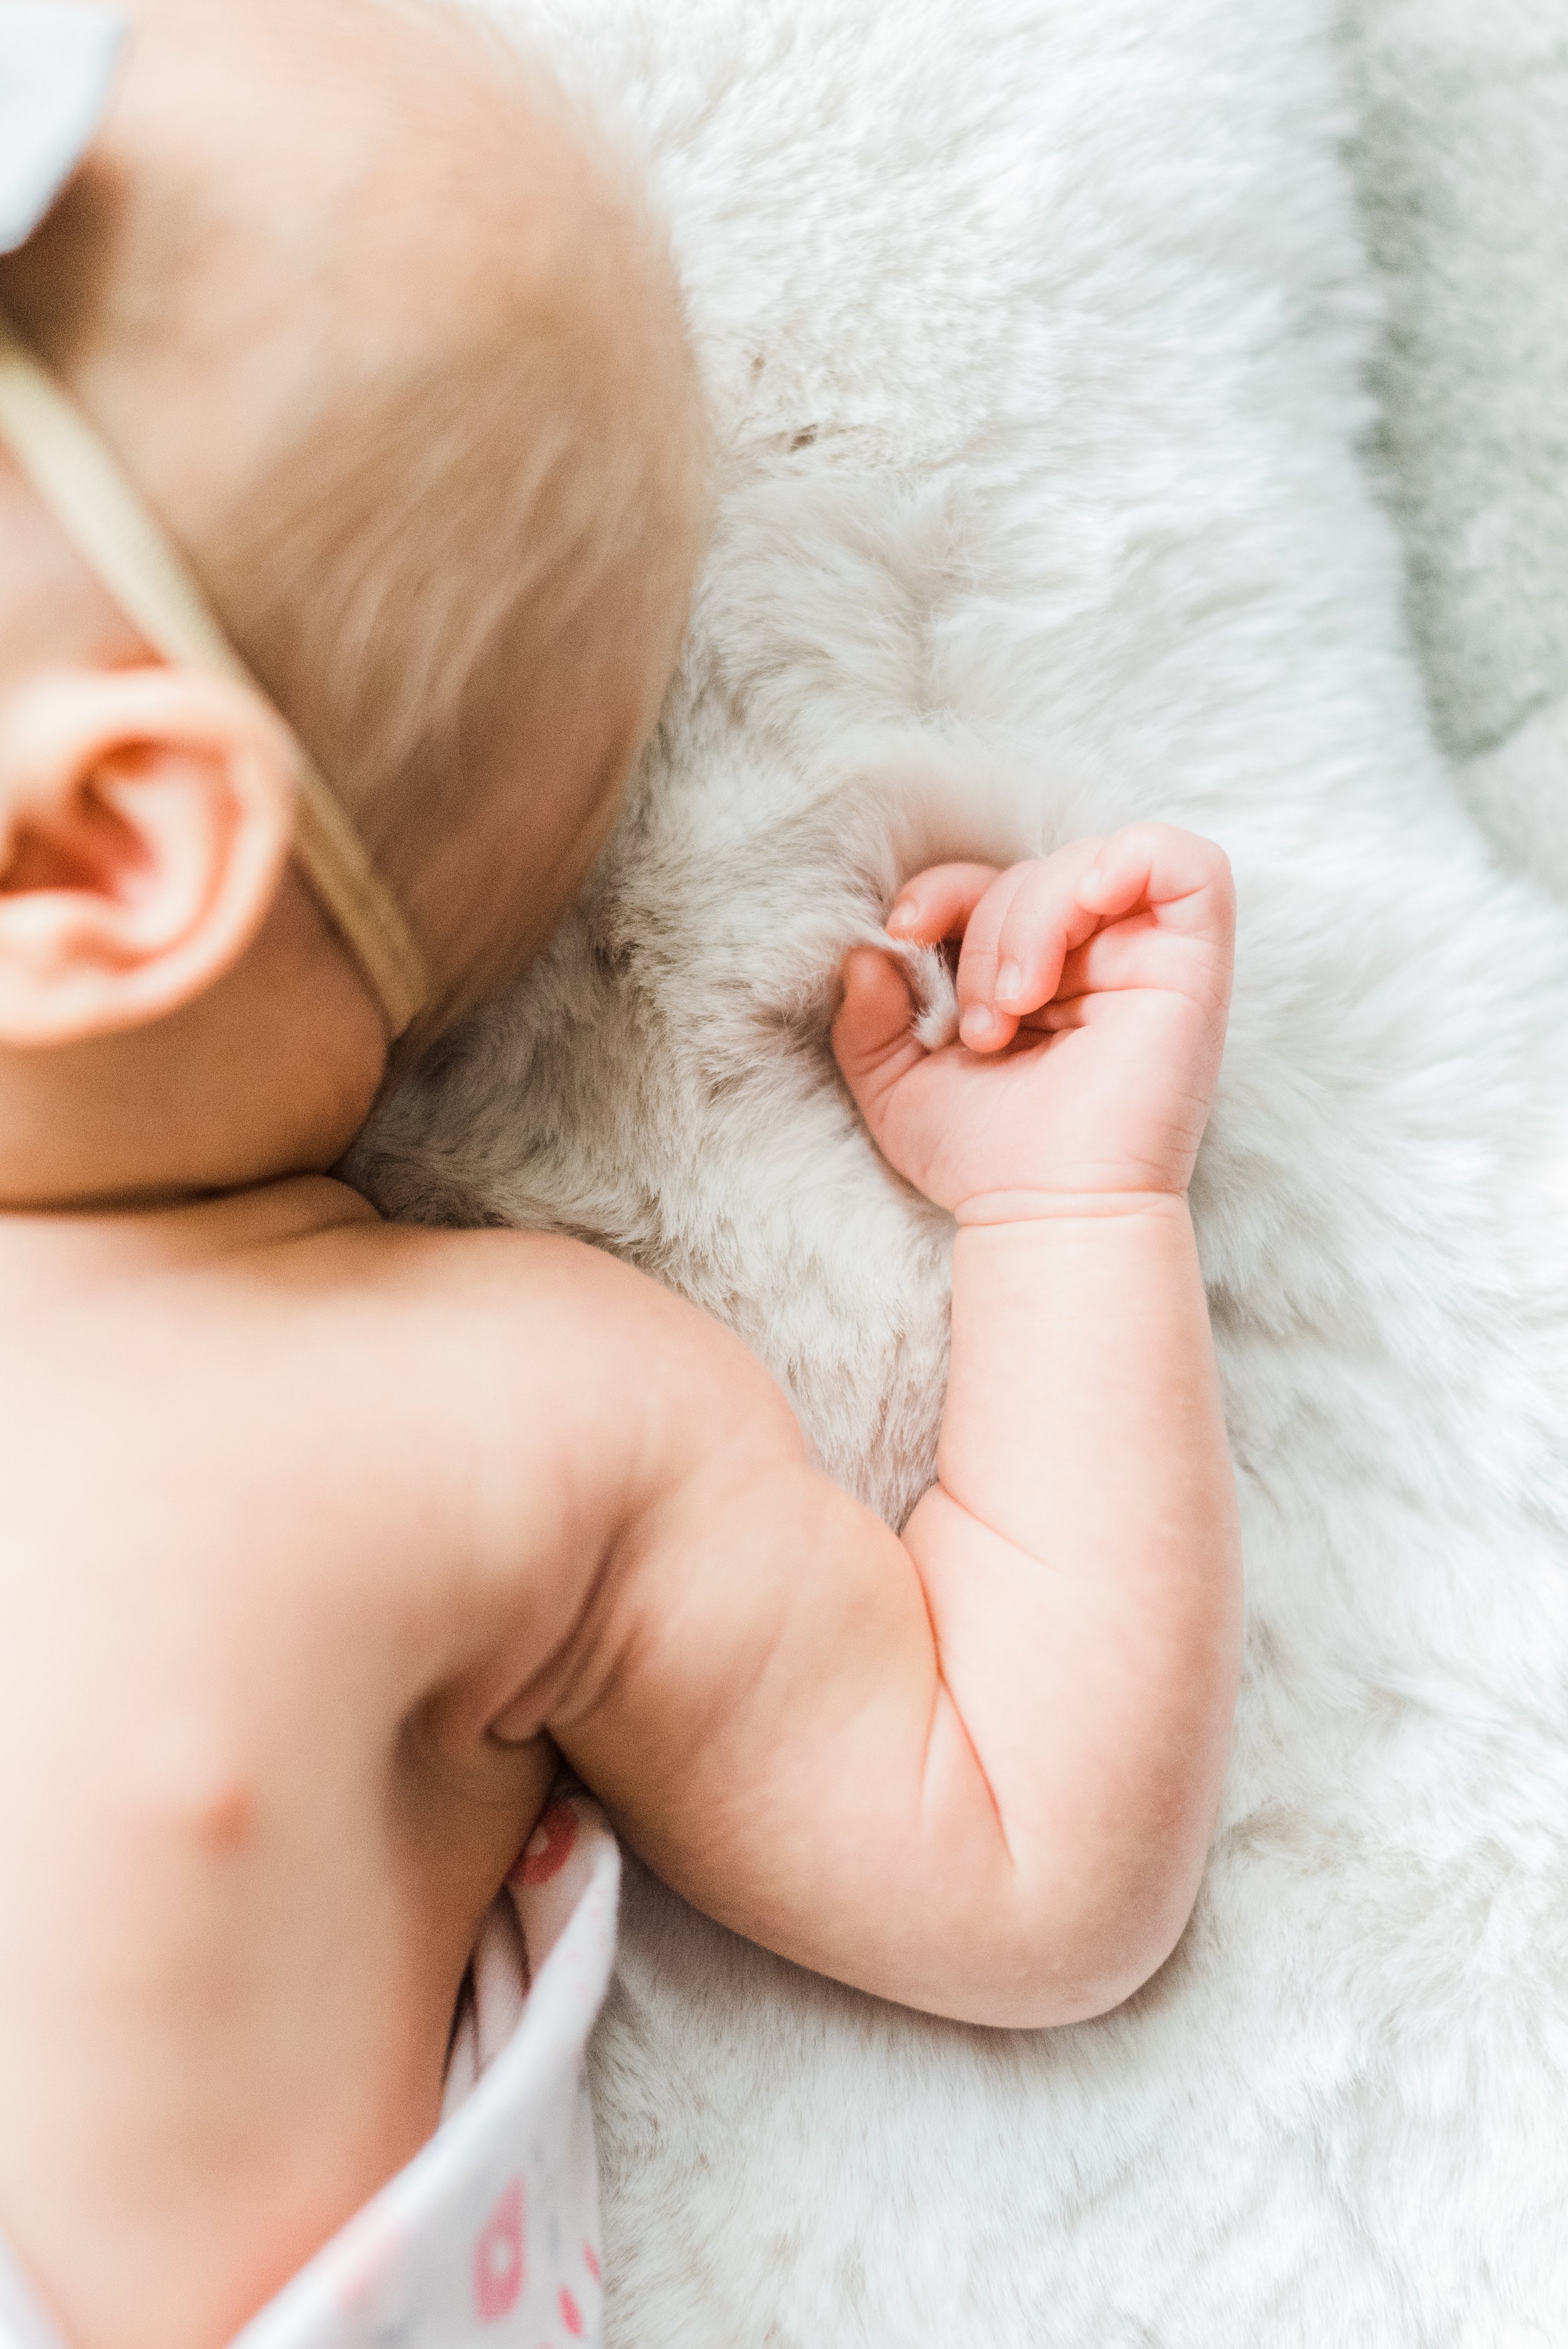  A close-up photo of a newborn girl gripping the fluffy blanket with her tiny hand. Newborn photo session DIY newborn photos #naturallight #newbornphotographytips #diyphotography #momphotographer #photographytips 